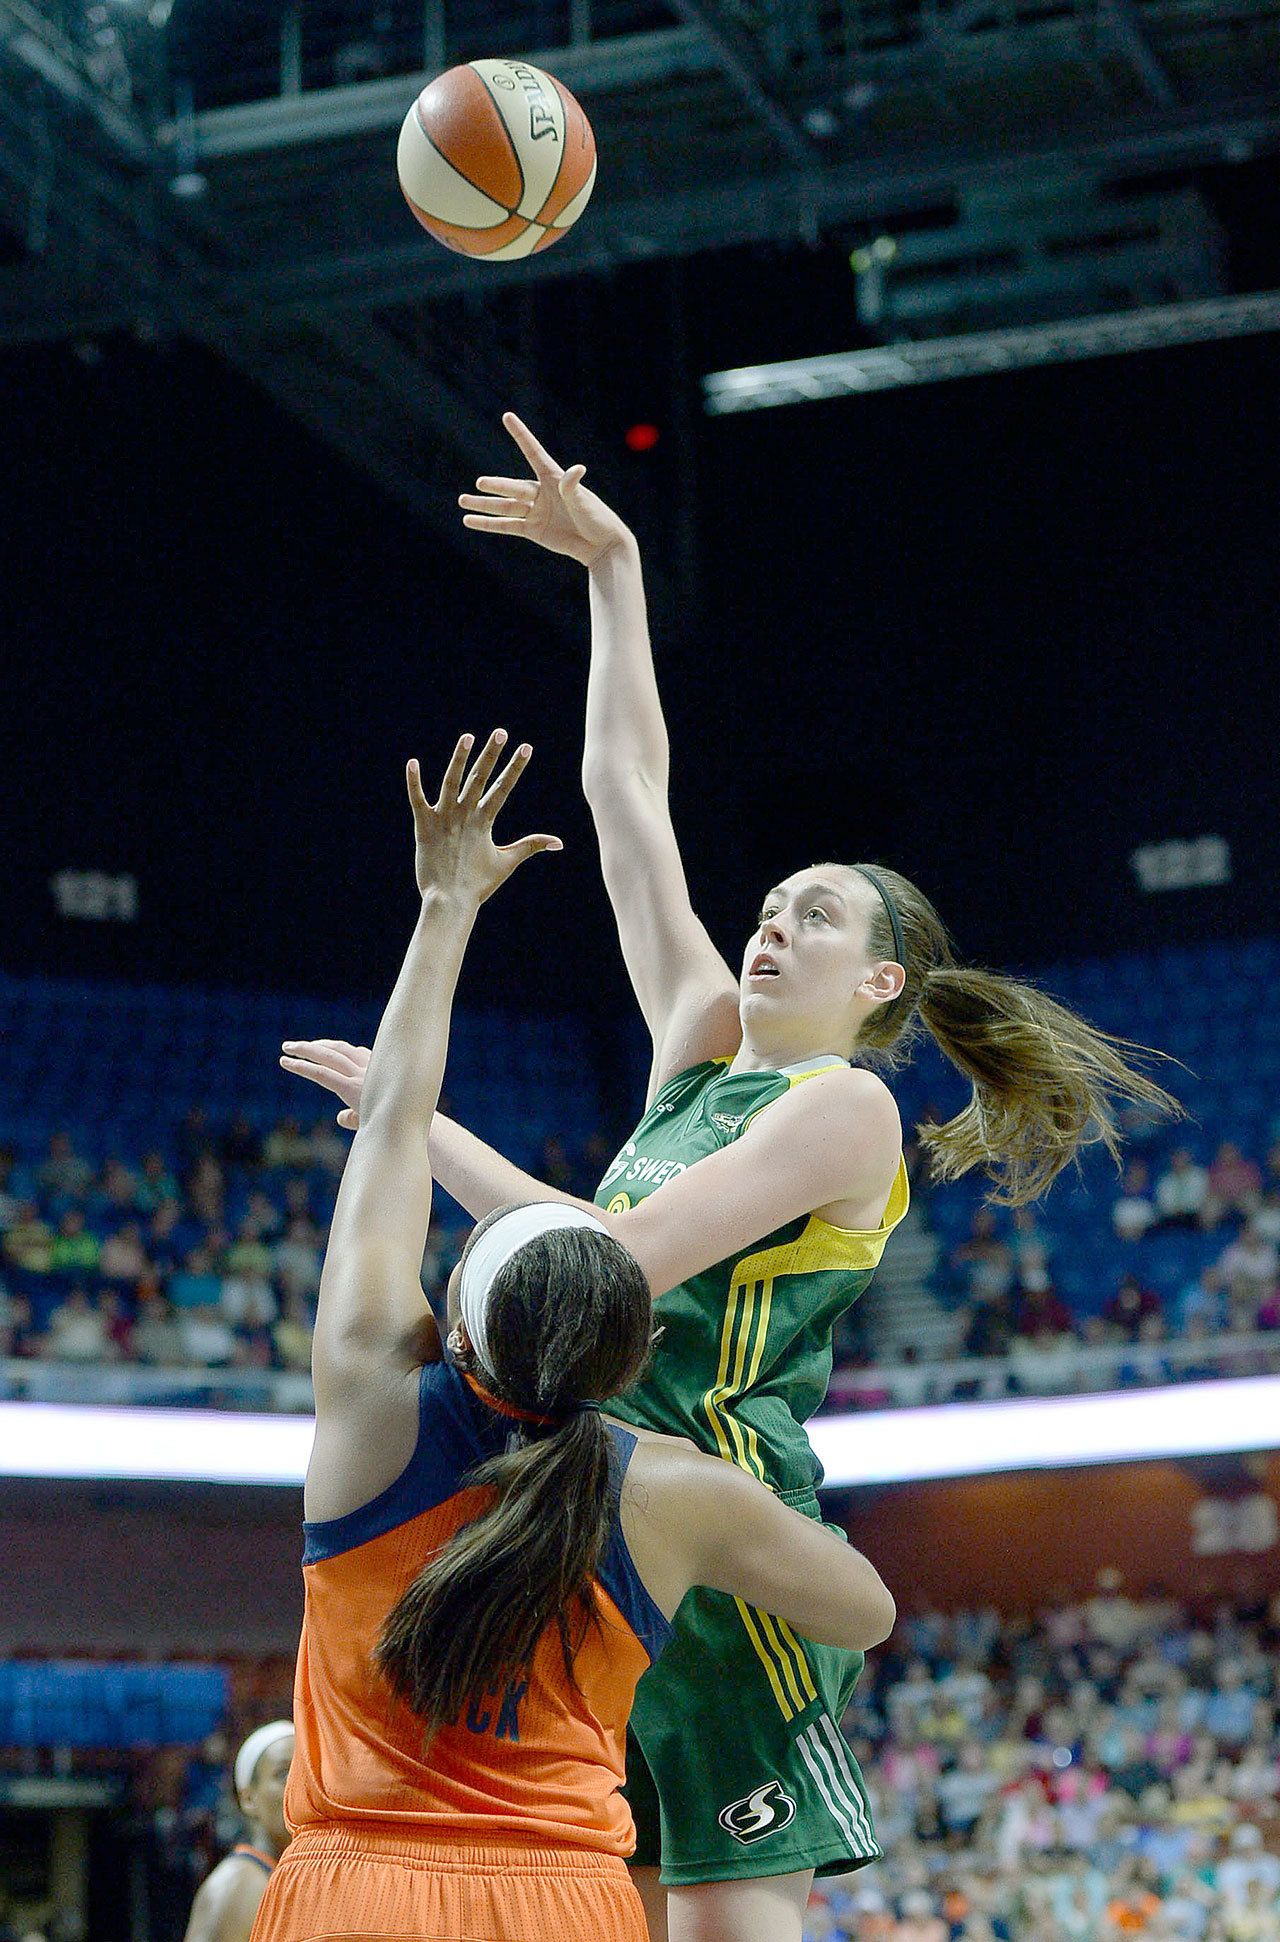 Seattle’s Breanna Stewart shoots over Connecticut’s Morgan Tuck during a game on June 10. Stewart won the WNBA’s Rookie of the Year award on Tuesday and Tuck, her former UConn teammate, joined Stewart on the all-rookie team. (AP Photo/Jessica Hill)